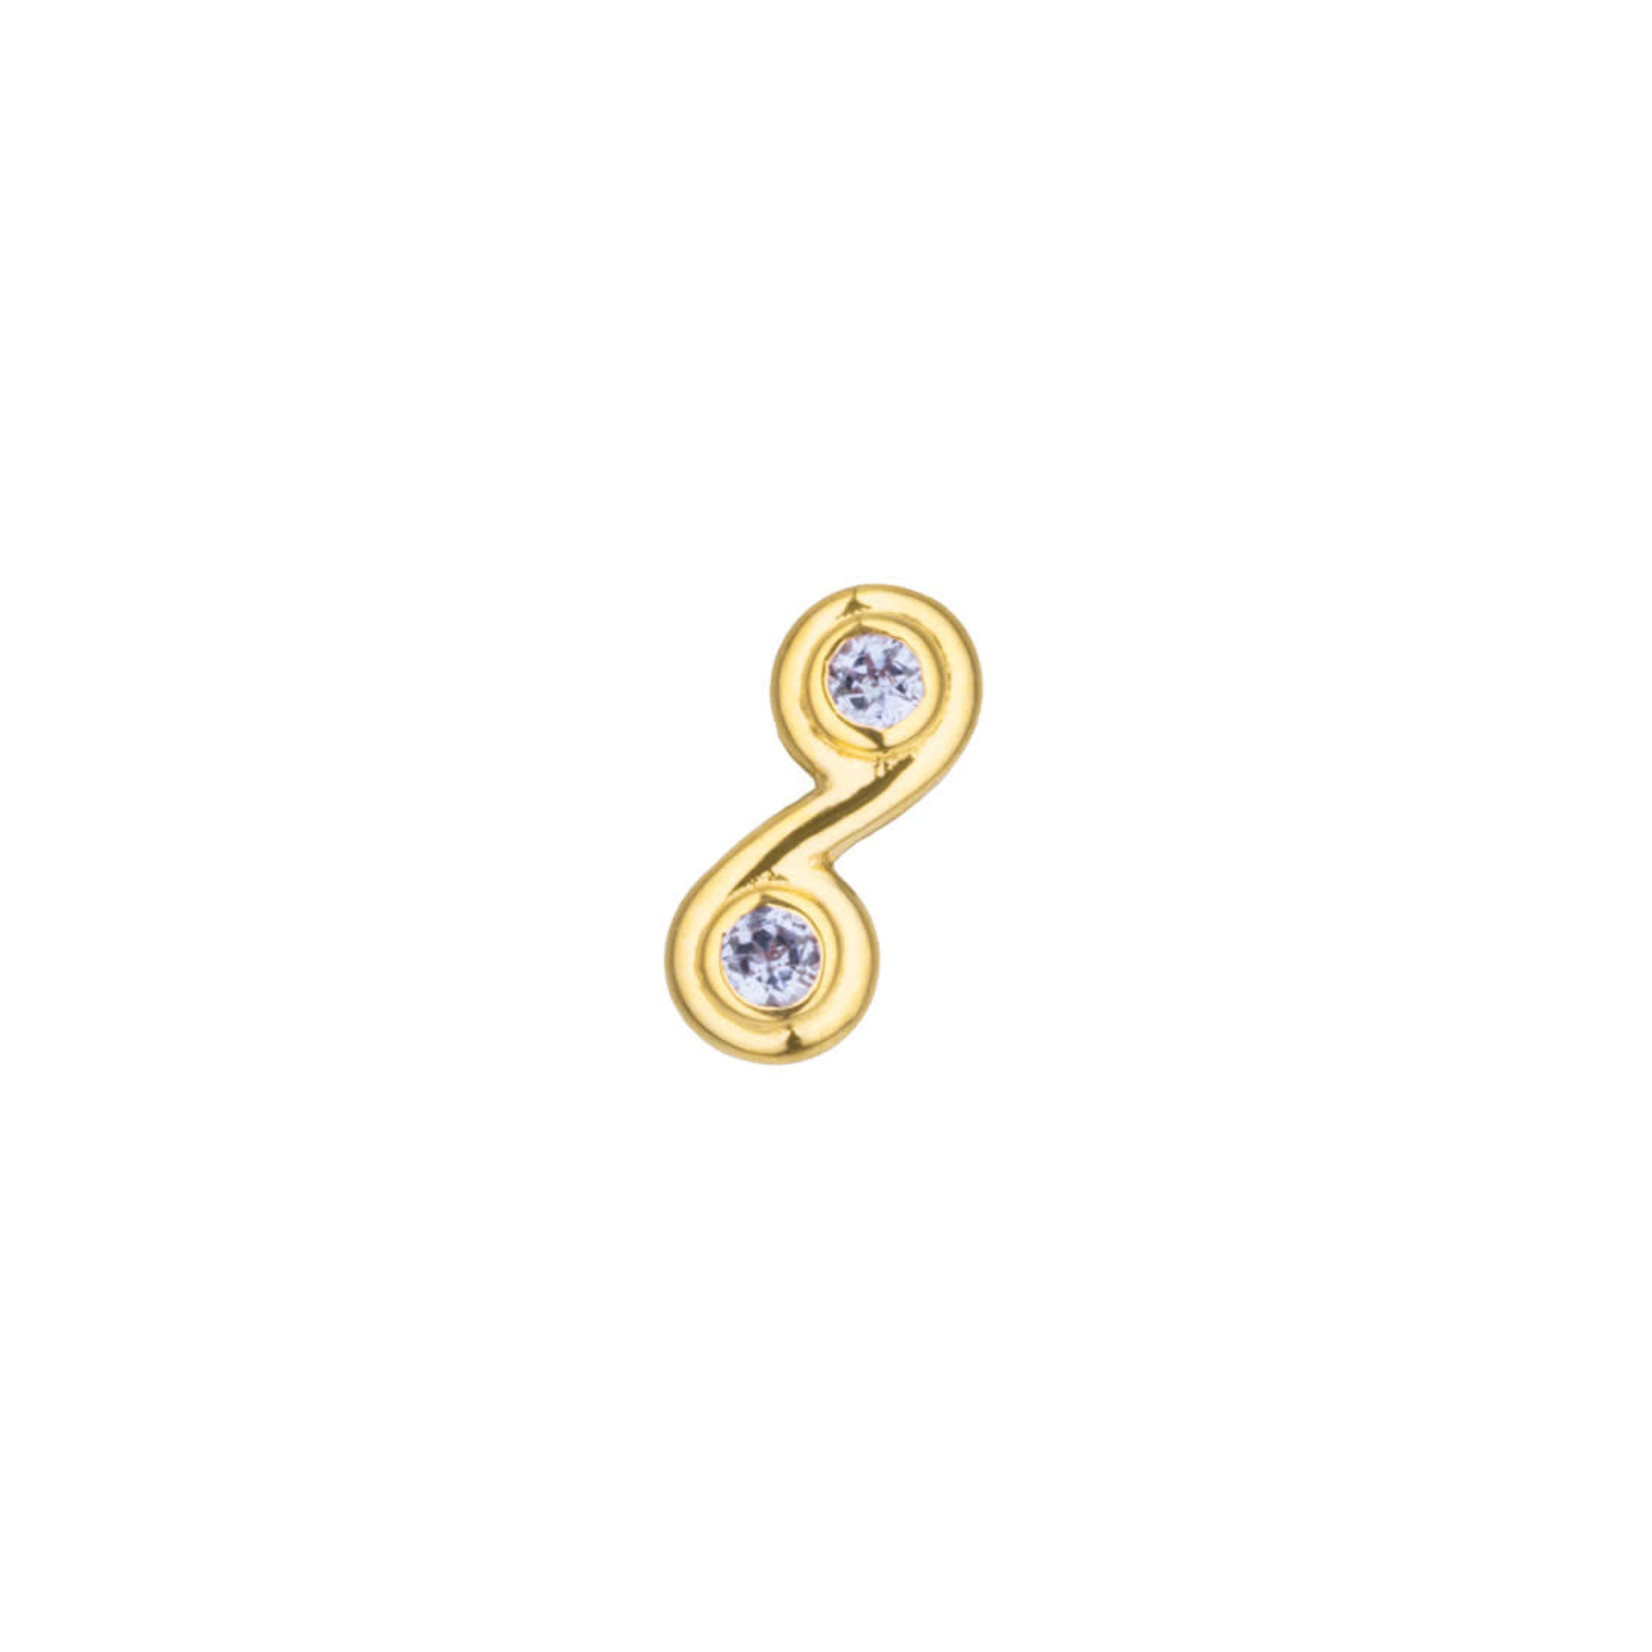 BVLA BVLA "Double gem swirl" threaded end with 1.5 AA Tanzanite